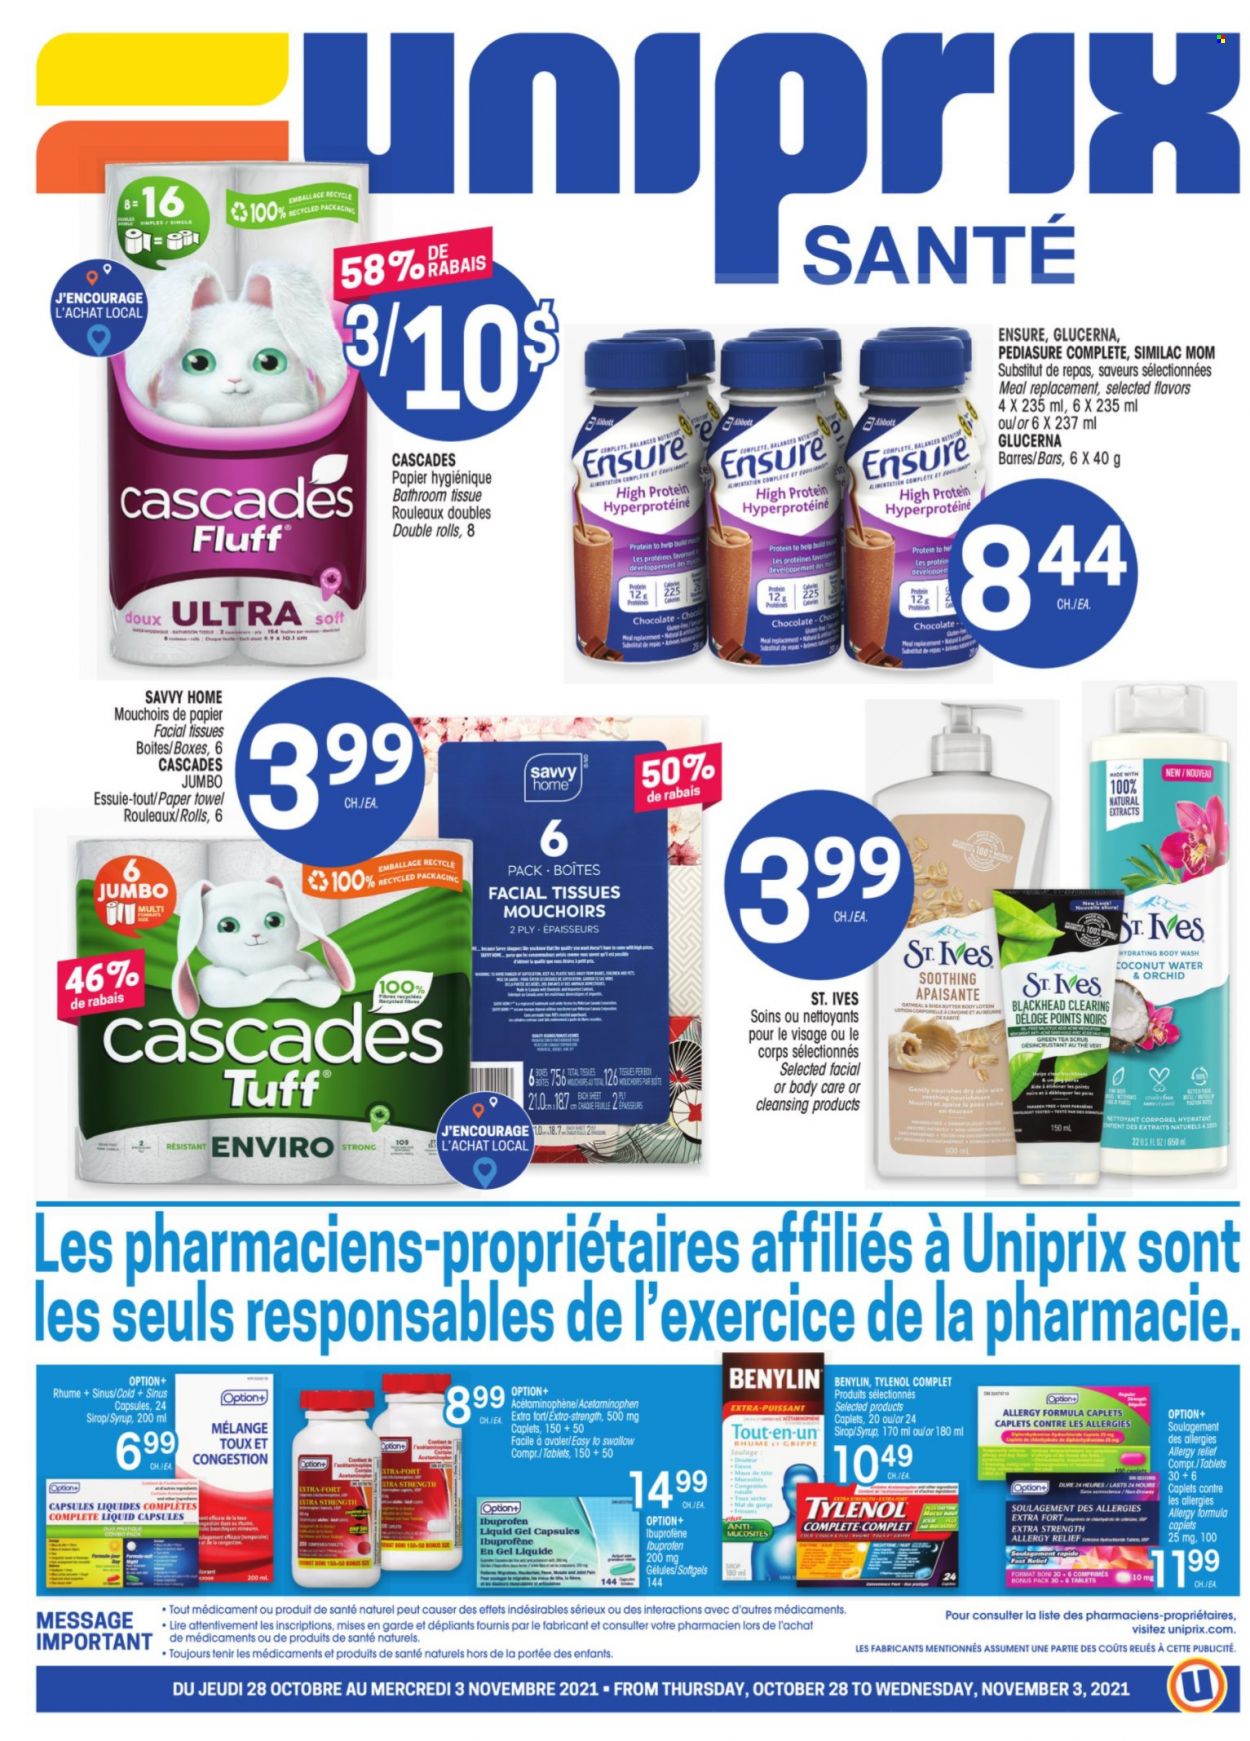 thumbnail - Uniprix Santé Flyer - October 28, 2021 - November 03, 2021 - Sales products - chocolate, syrup, green tea, tea, Similac, bath tissue, paper towels, XTRA, body wash, facial tissues, body lotion, Tylenol, Ibuprofen, Glucerna, Benylin, allergy relief. Page 1.